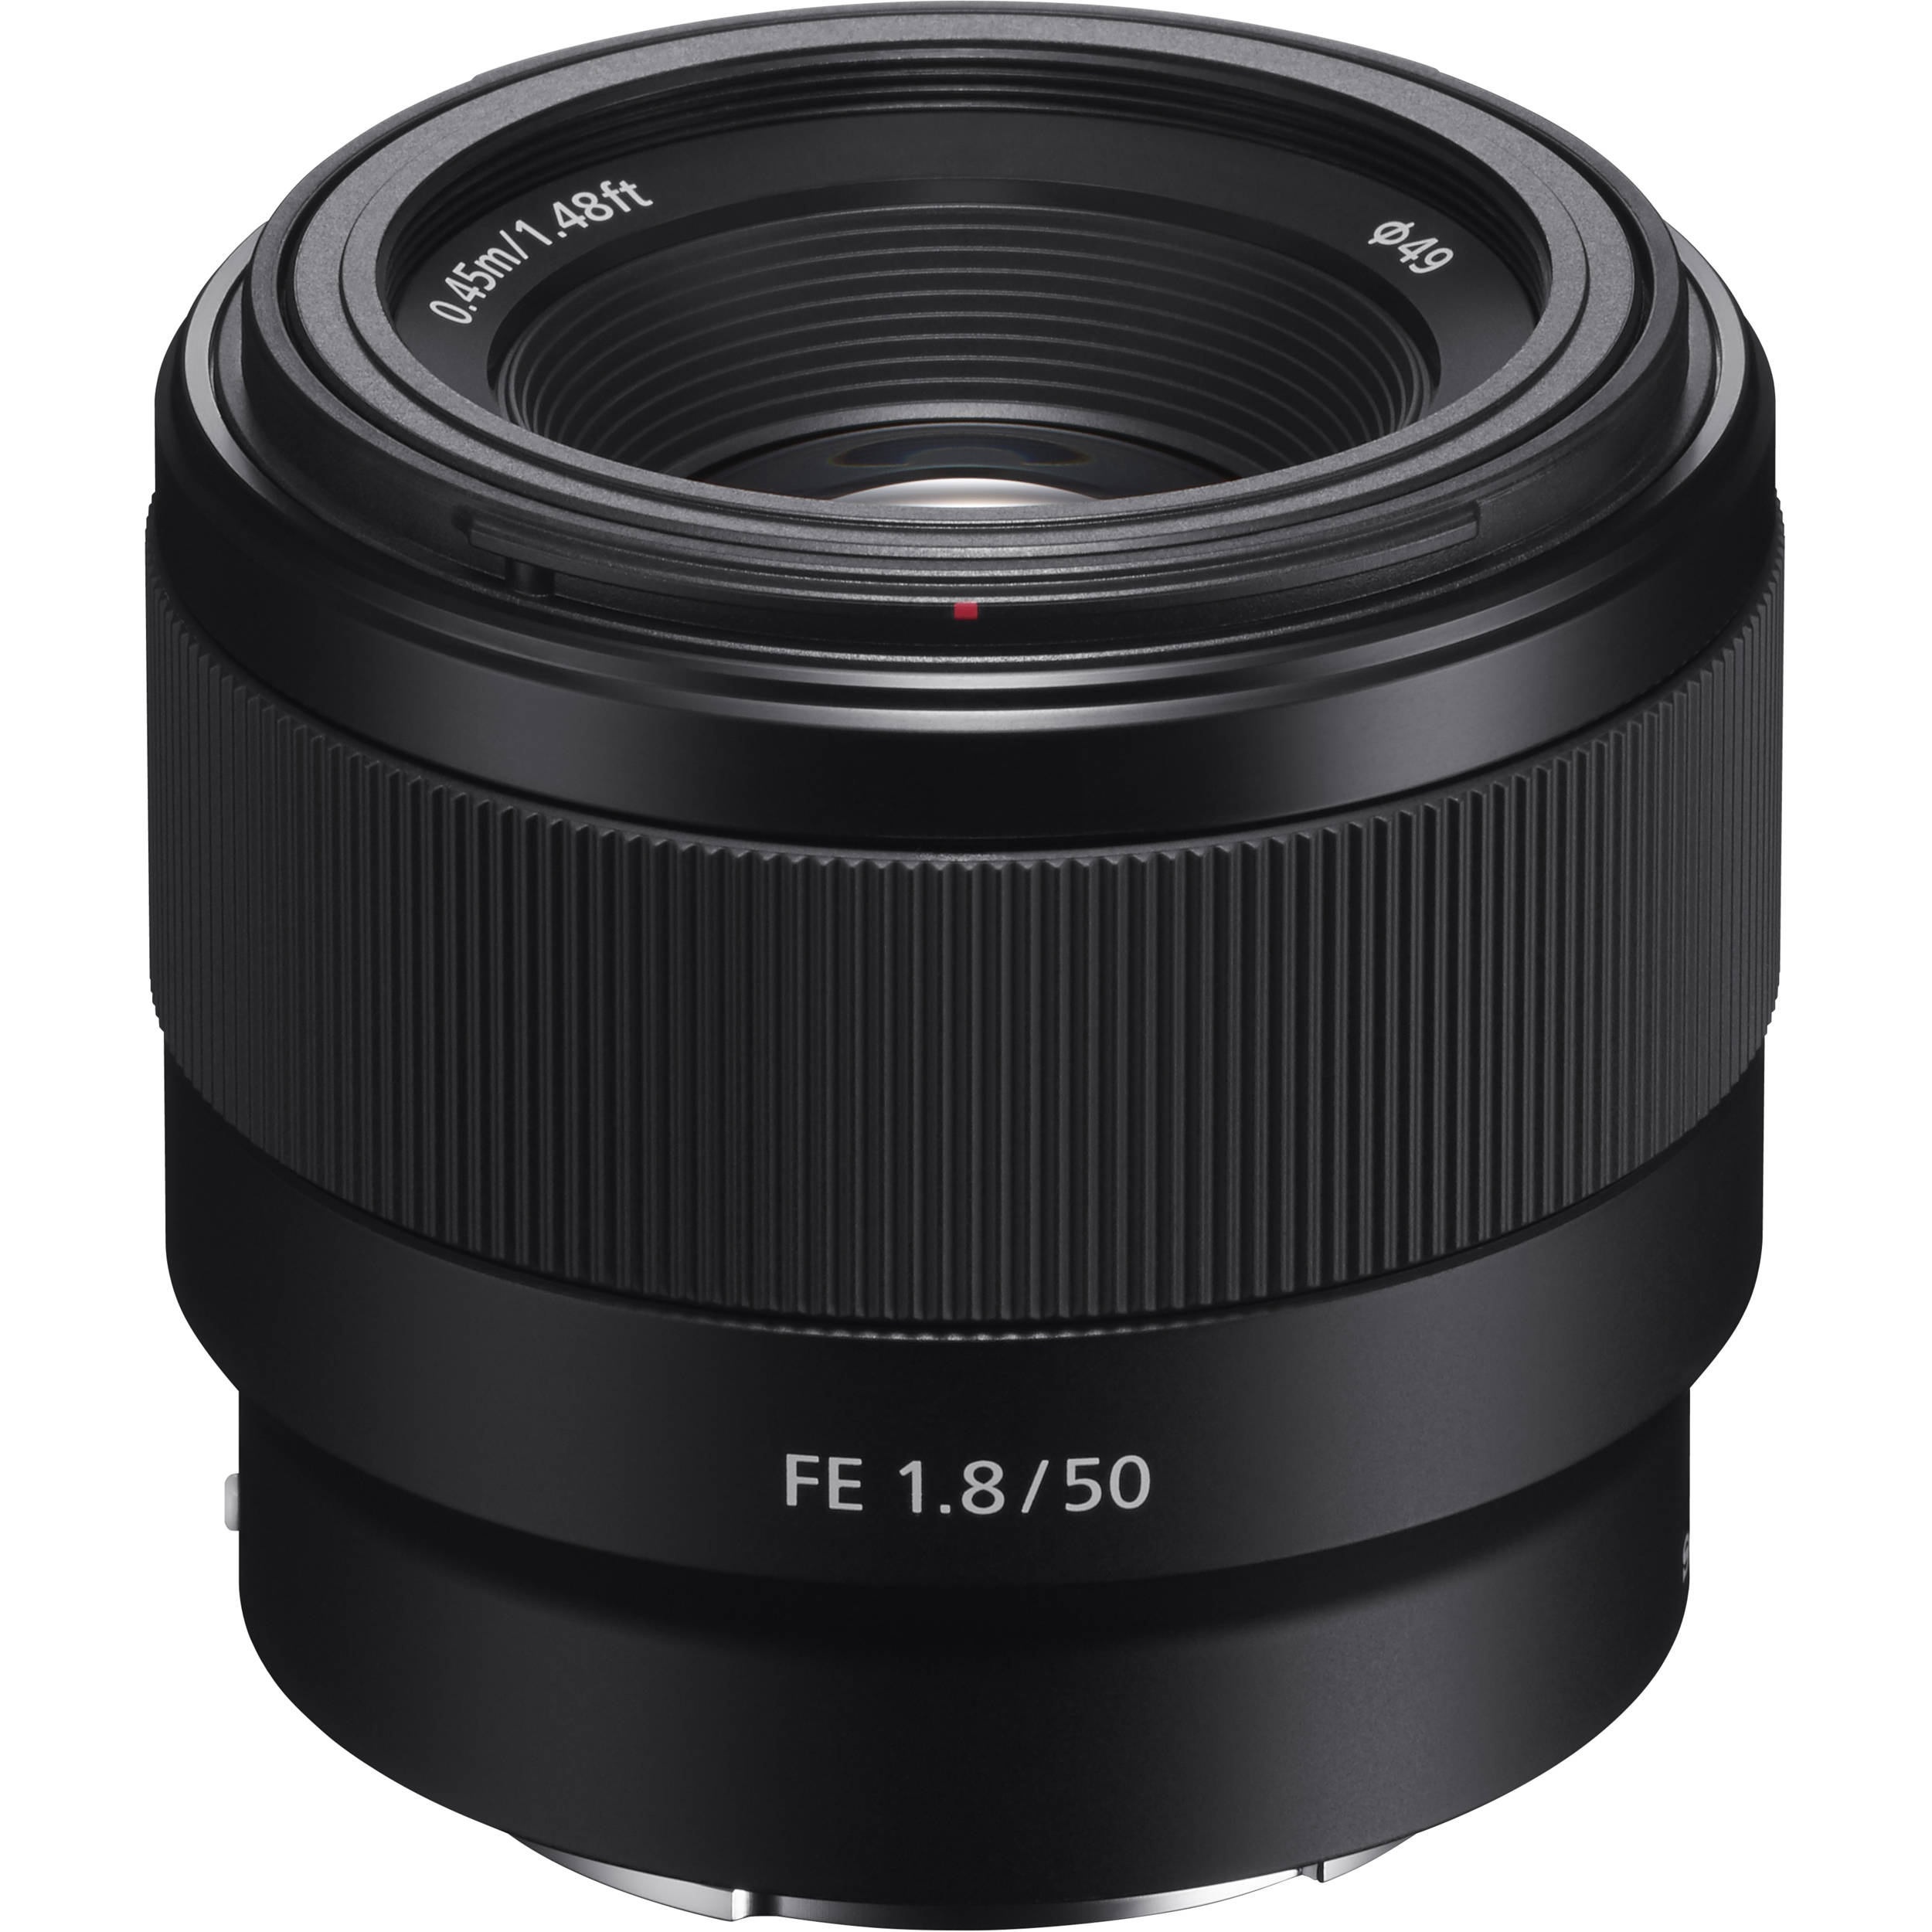 Sony FE 50mm f/1.8 Lens Announced, Price $248, Available for Pre-order